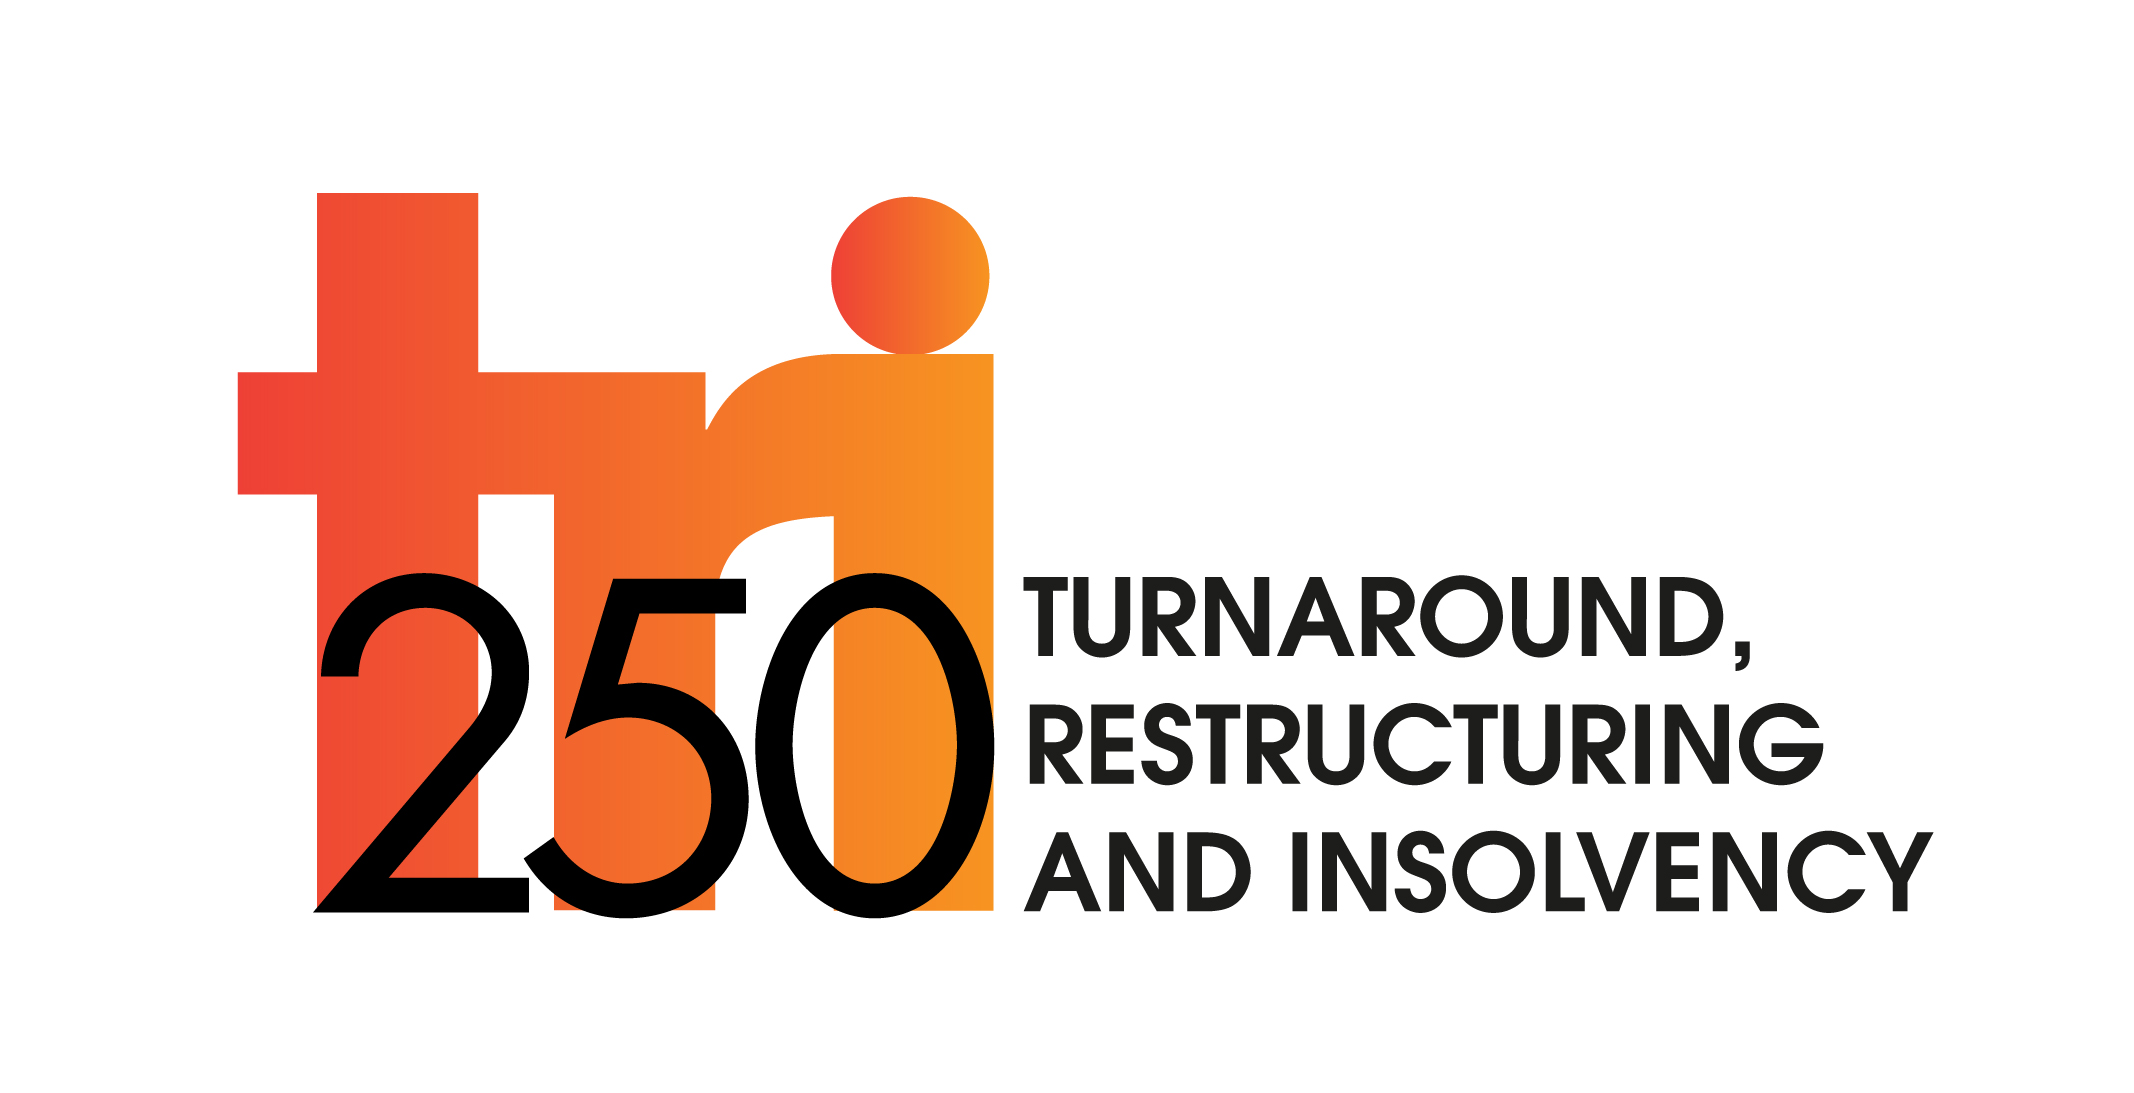 TRI 250 Turnaround, restructuring and insolvency